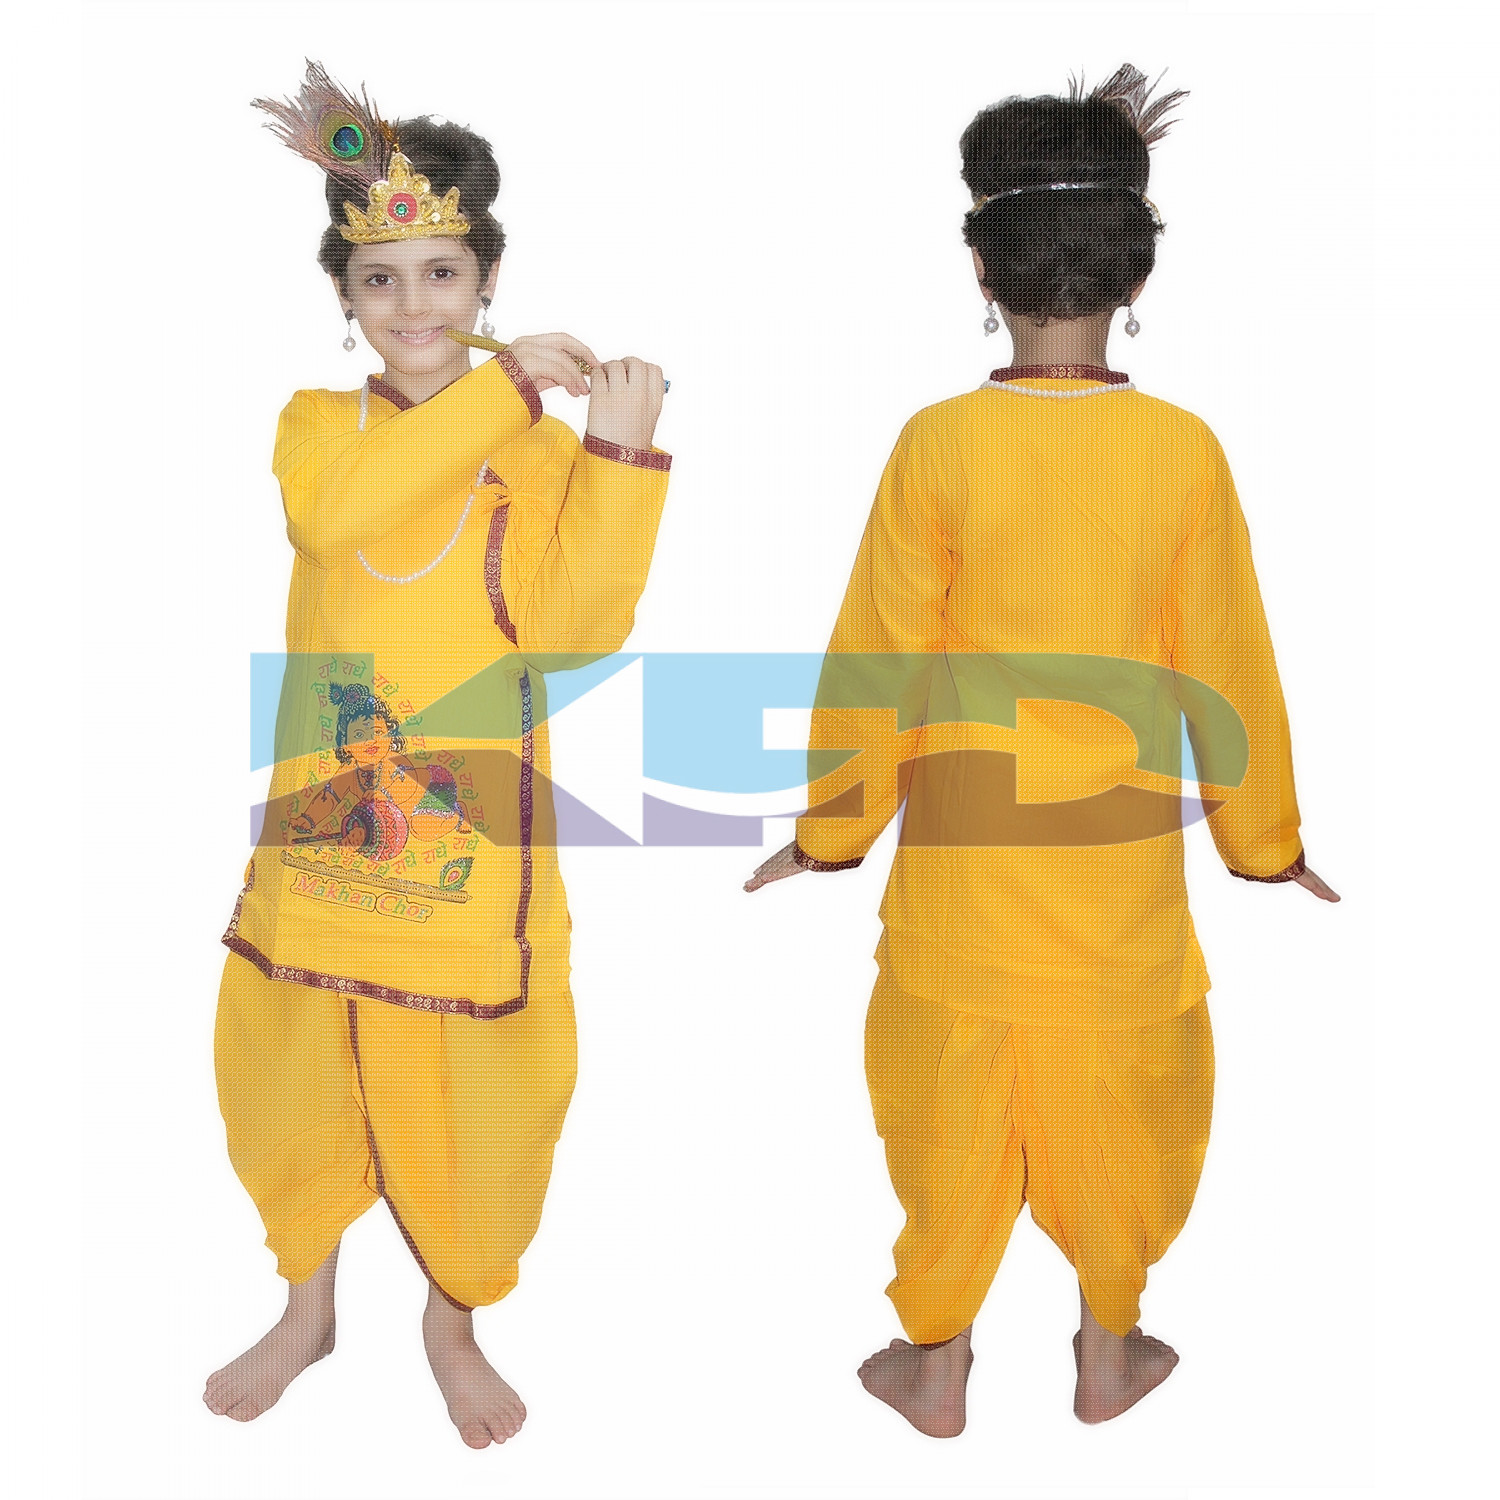 Krishna in Cotton fancy dress for kids,Krishnaleela/Janmashtami/Kanha/Mythological Character for Annual functionTtheme Party/Competition/Stage Shows Dress